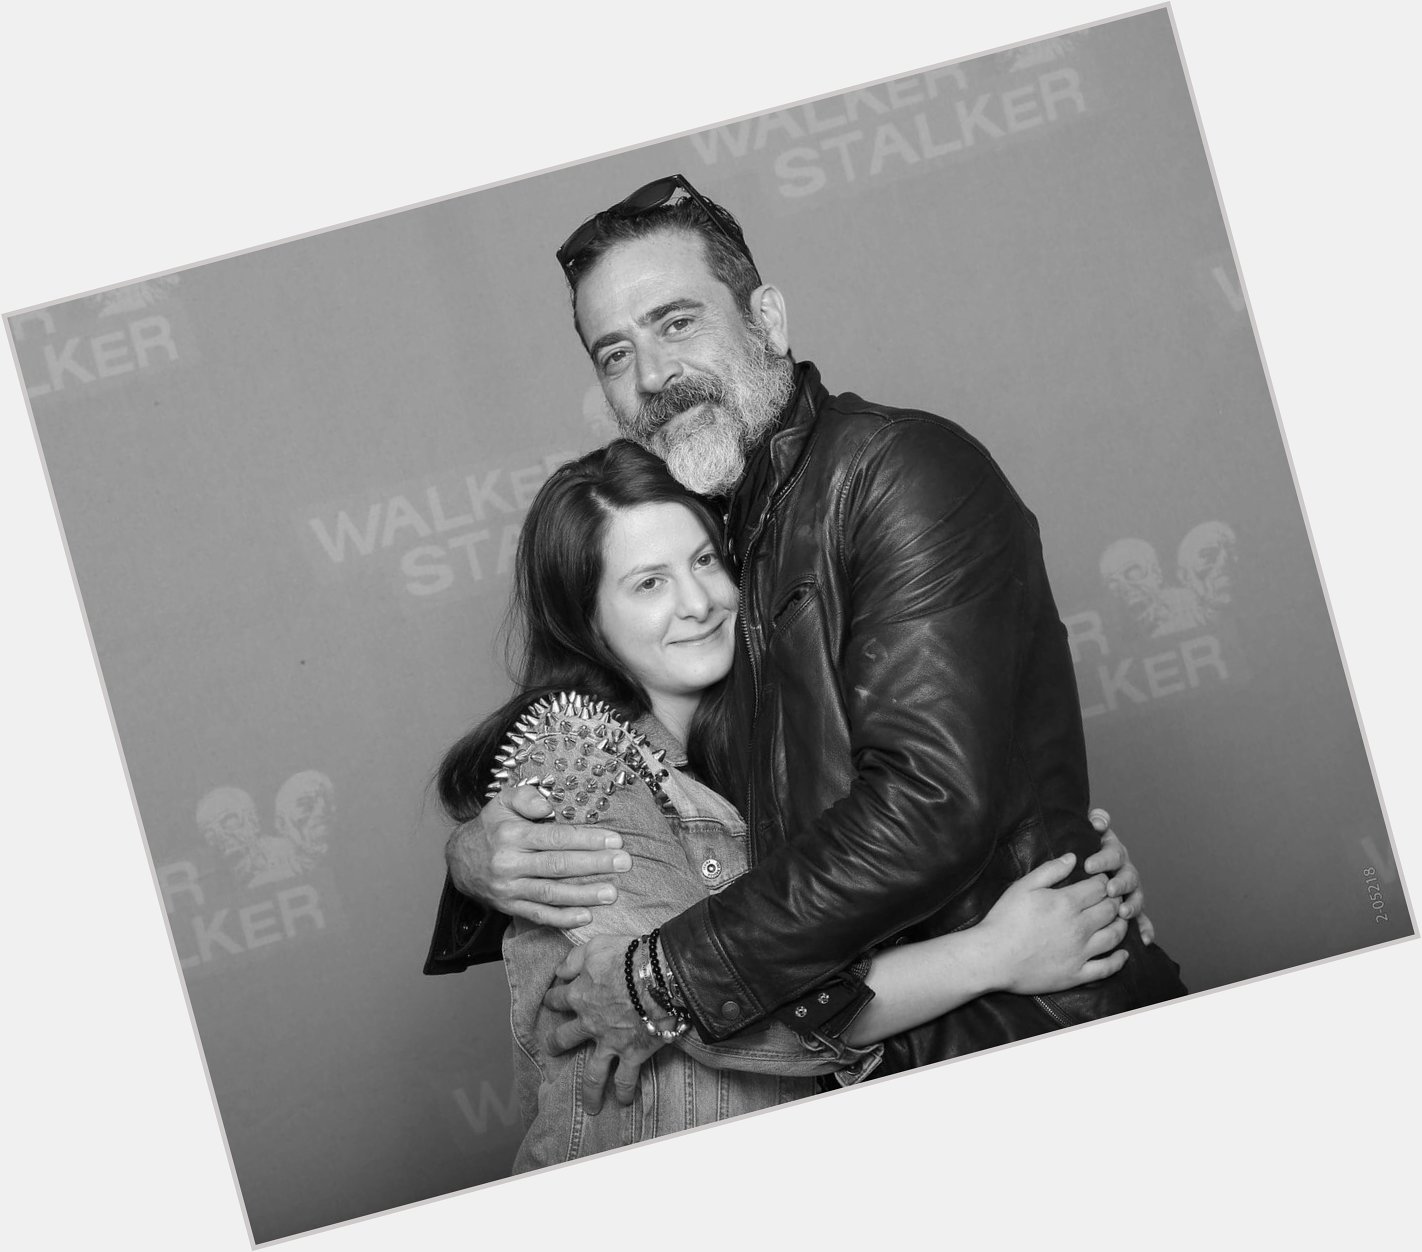 (This makes me look like I just got out of bed but anyway.) Happy Birthday Jeffrey Dean Morgan! Take care, be safe 